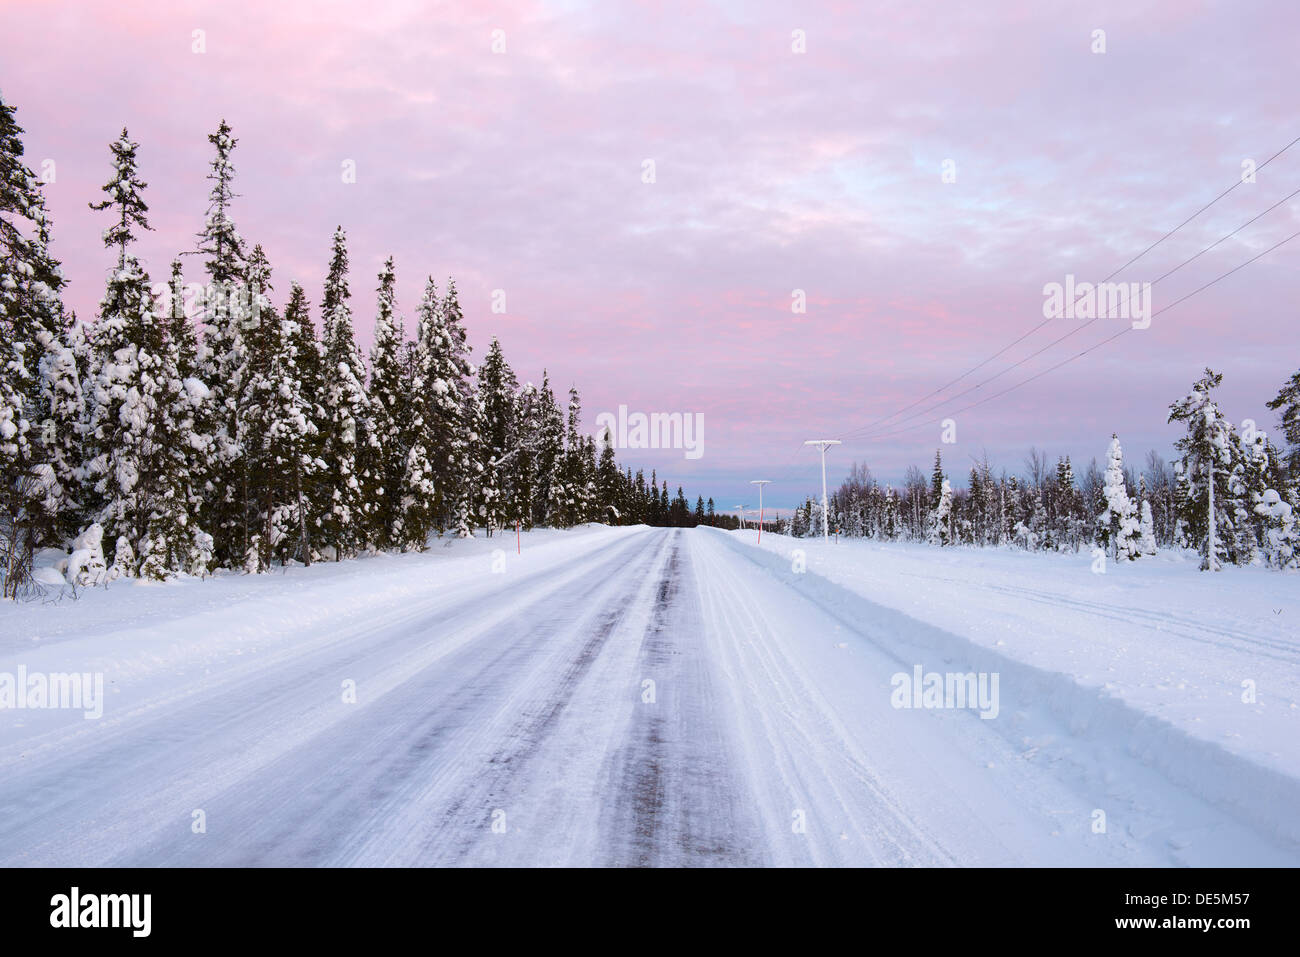 After sunset on the frozen winter roads in northern Finland Stock Photo